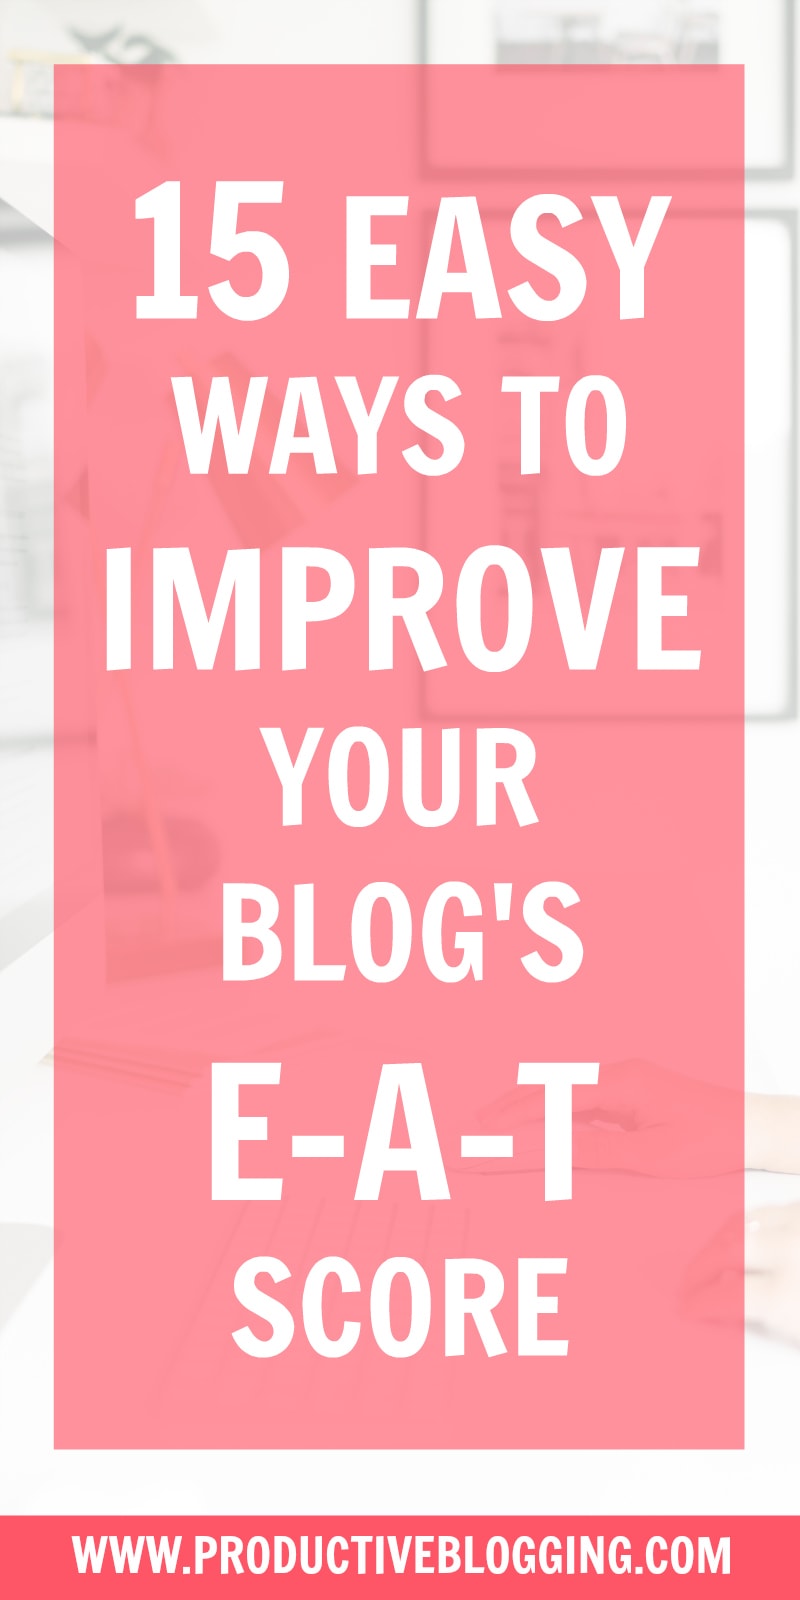 If you want to rank on Google, you need to pay attention to your blog’s expertise, authoritativeness and trustworthiness (E-A-T). Here are 16 easy ways to improve your blog’s E-A-T score. #EAT #GoogleEAT #EATscore #improveEAT #SEOforbloggers #SEOforbeginners #beginnersSEO #SEO #SEOtips #SEOhacks #searchengineoptimisation #searchengineoptimization #growyourblog #bloggrowth #bloggrowthhacks #bloggingtips #blogginghacks #blogging #bloggers #blogsmarter #blogsmarternotharder #productiveblogging